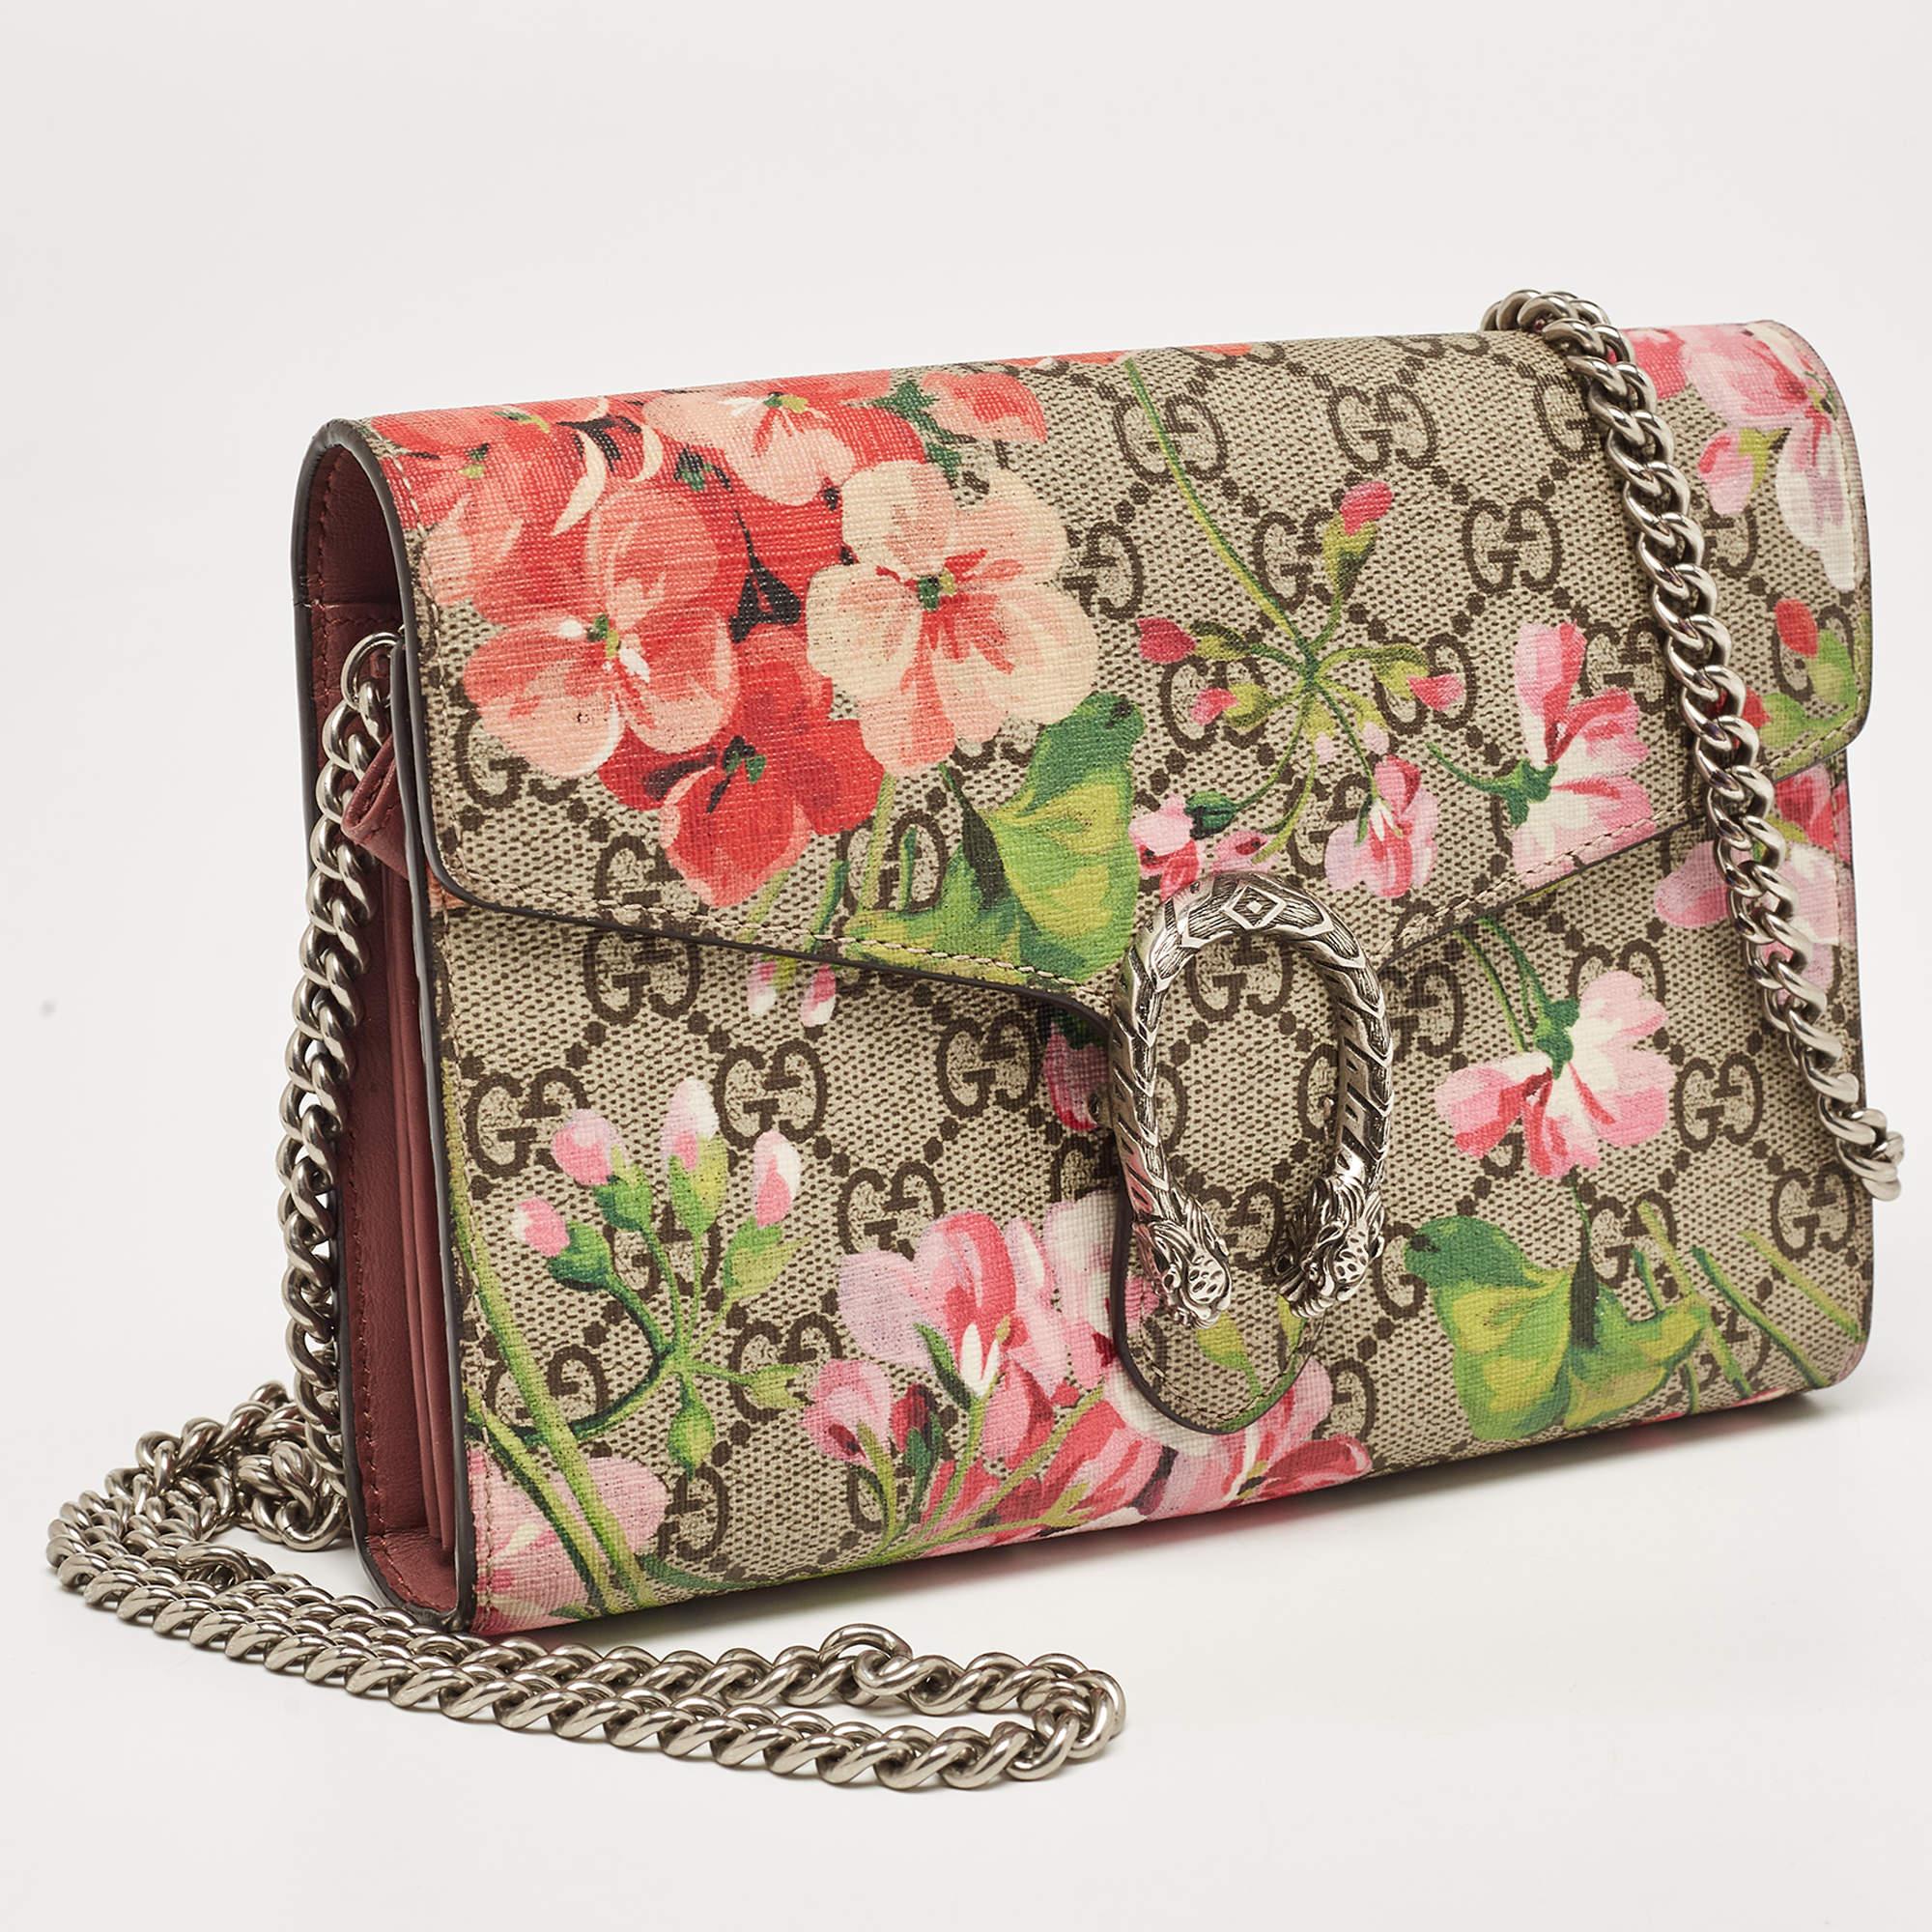 This Gucci Dionysus Wallet On Chain is beautifully crafted from Blooms-printed GG Supreme canvas and leather. The flap carries tiger heads with a reference to the Greek god Dionysus, and it secures a functional wallet-like interior.

